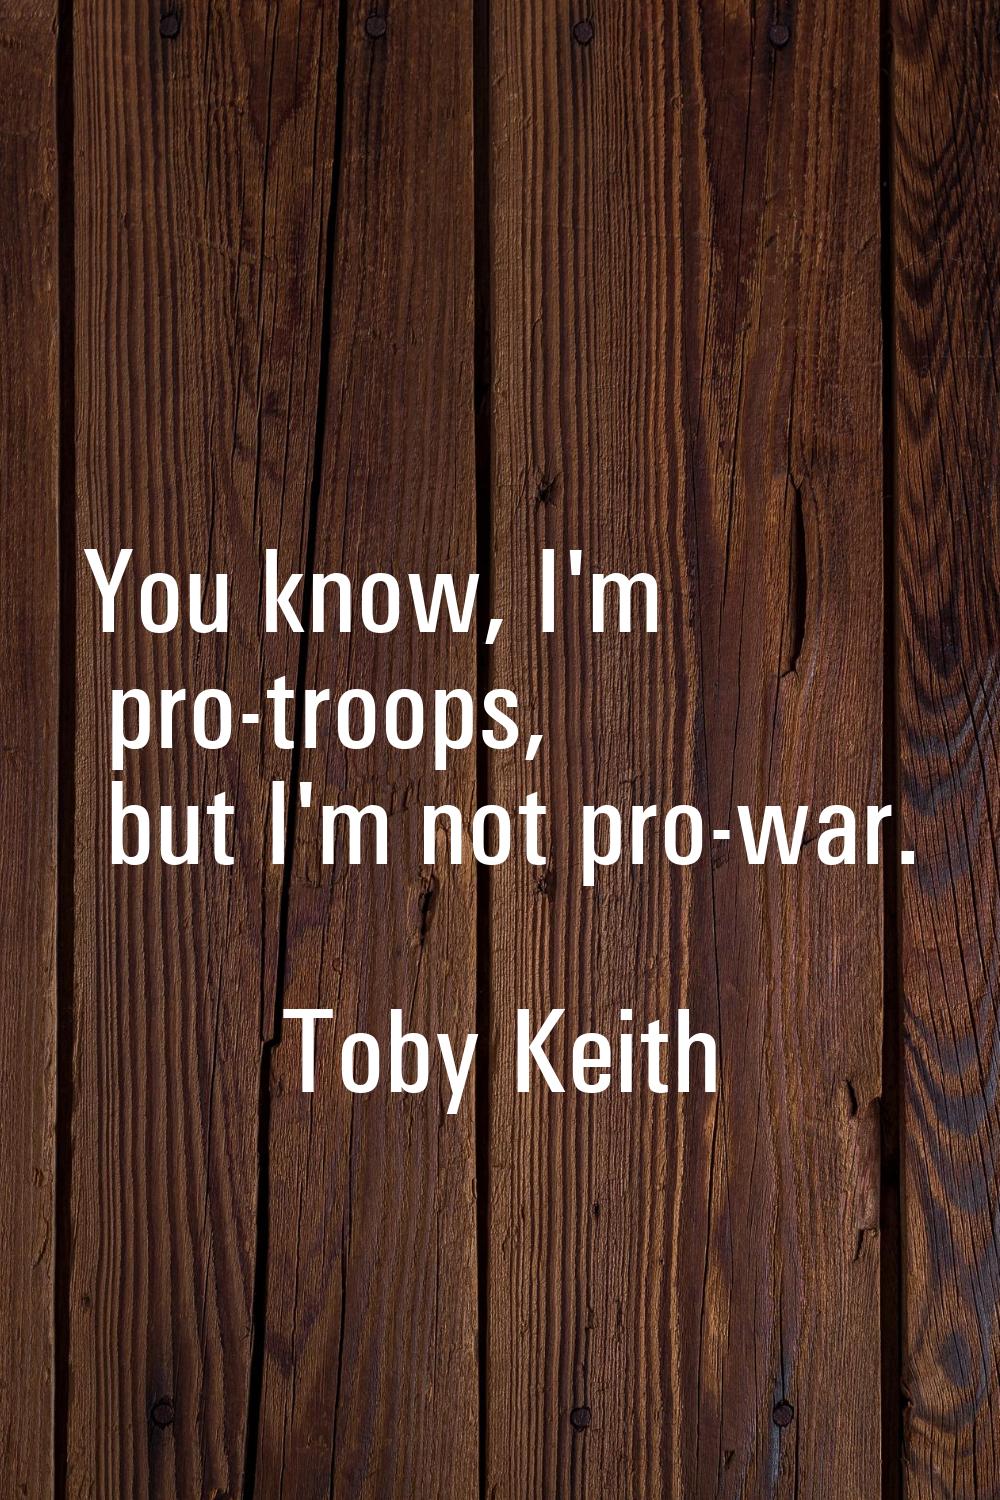 You know, I'm pro-troops, but I'm not pro-war.